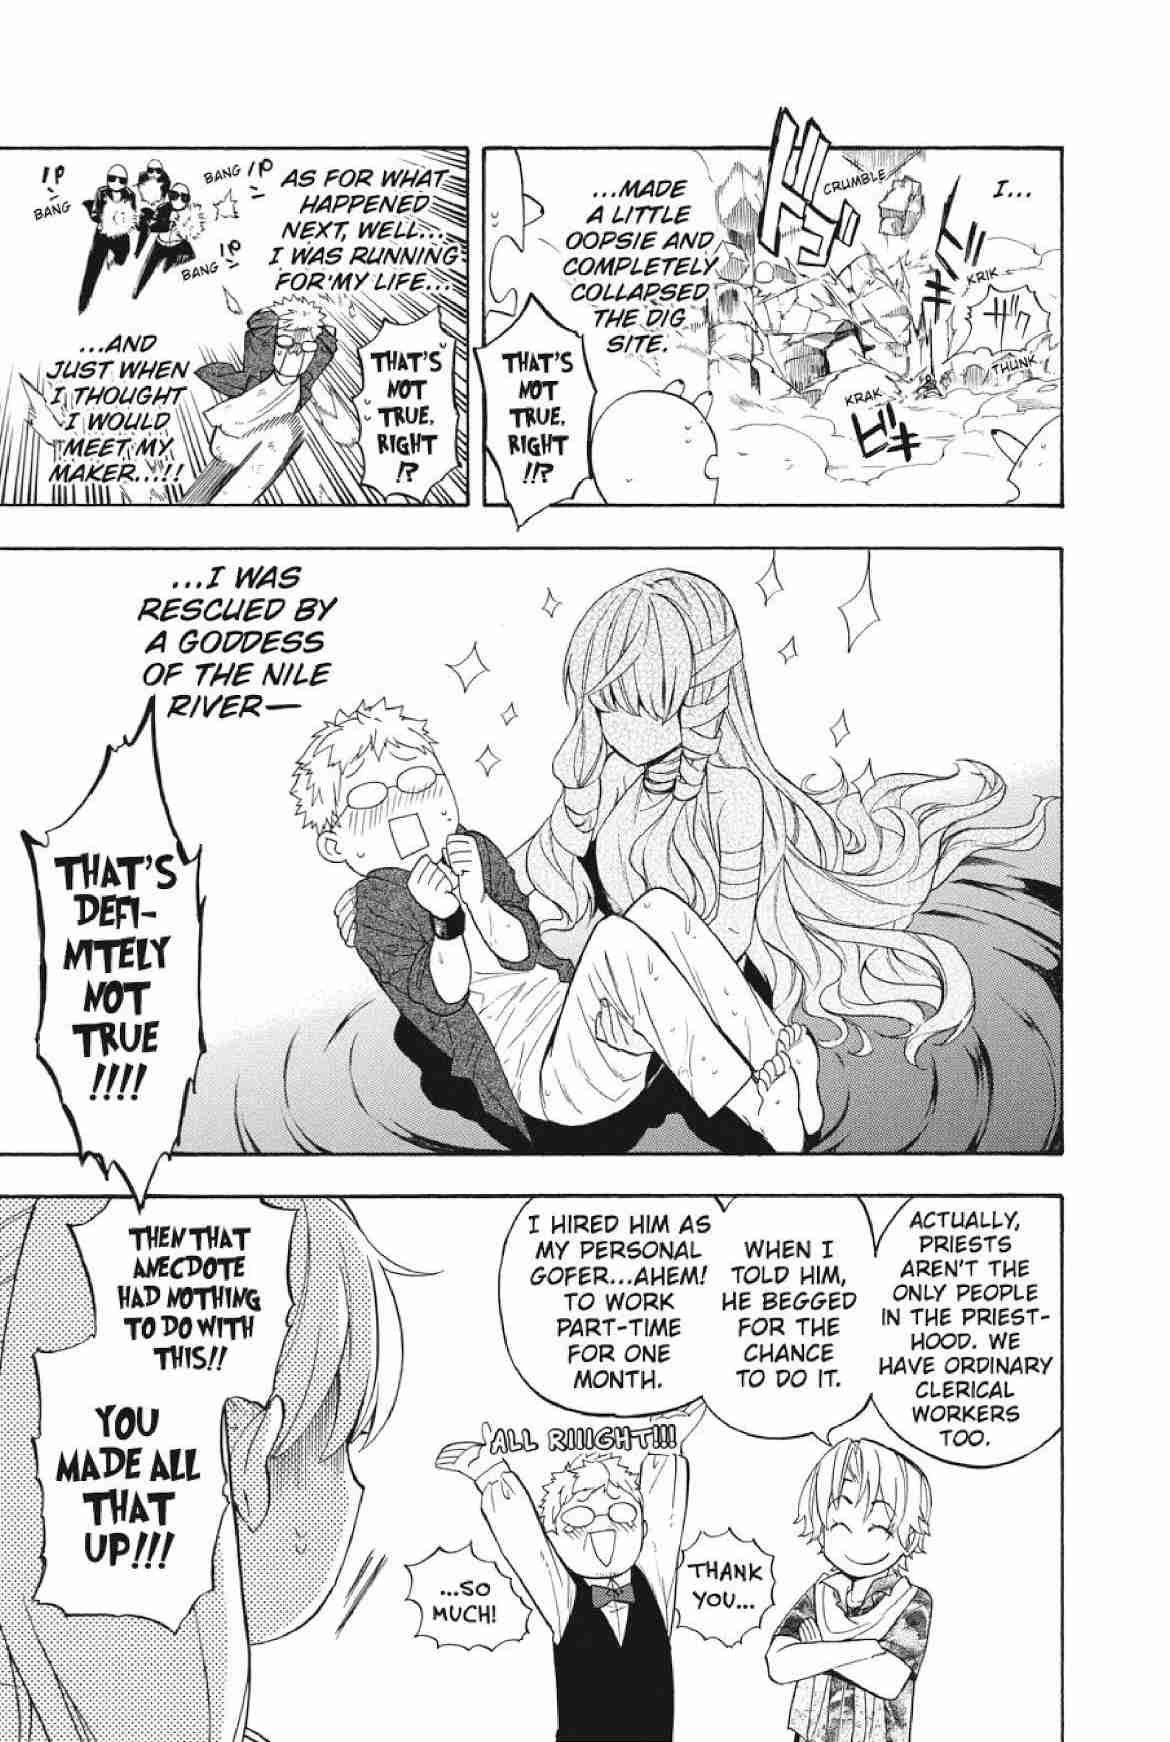 Im - Great Priest Imhotep Vol.6 Ch.20